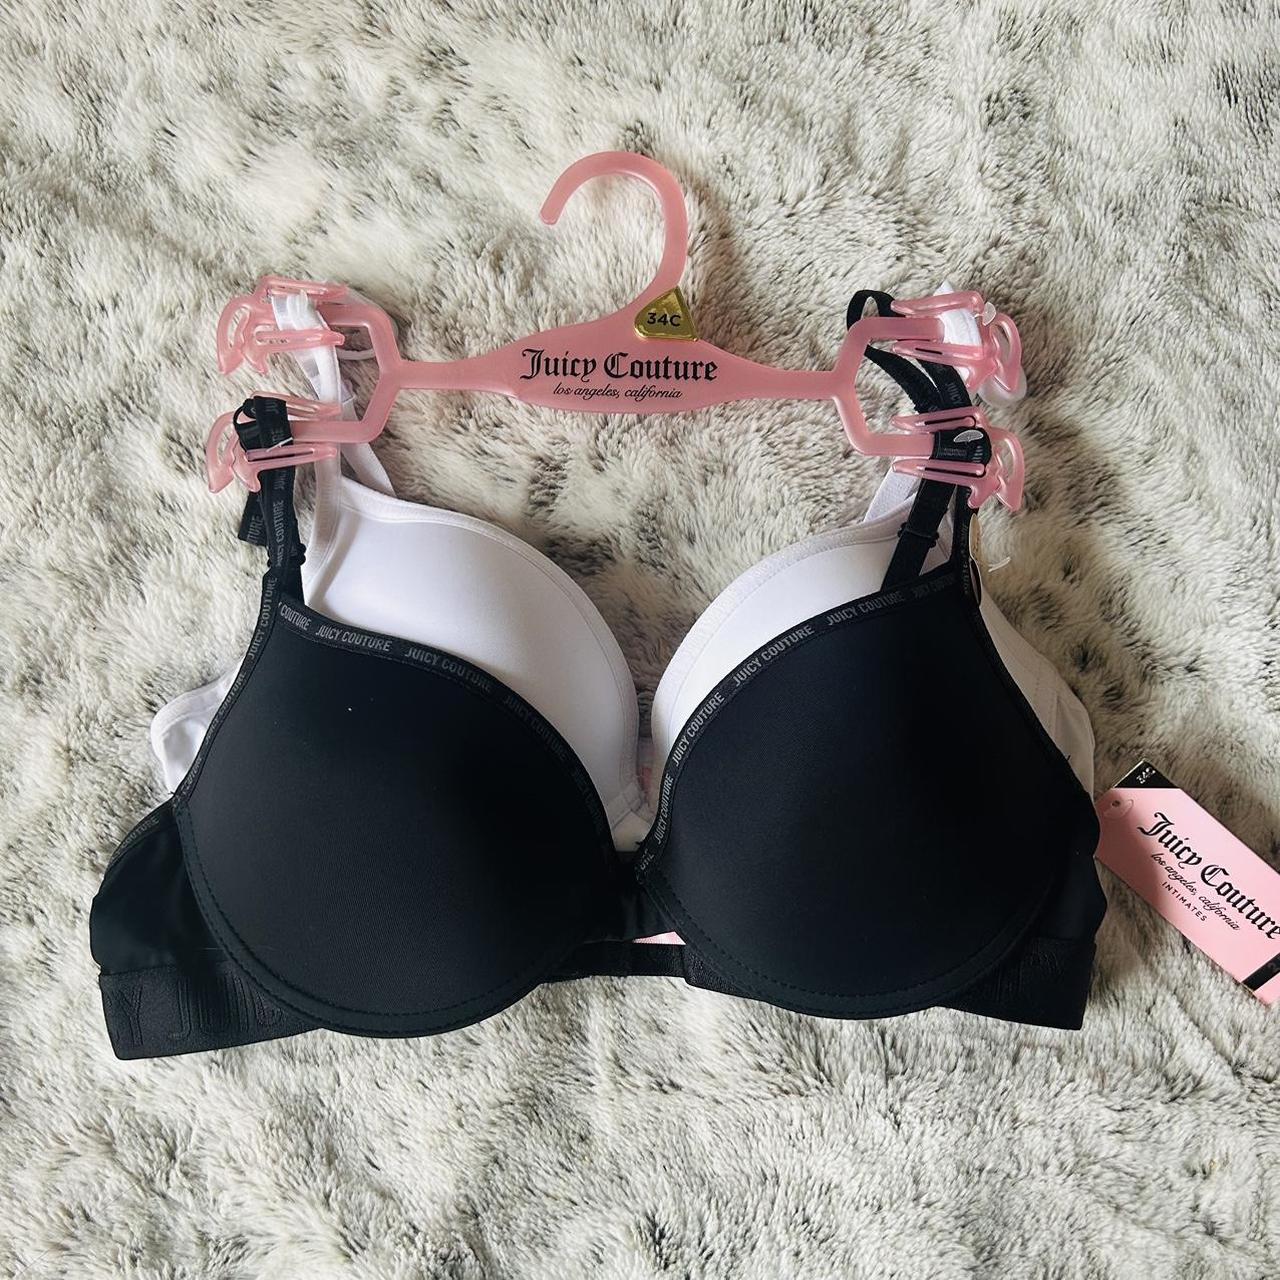 Juicy Couture White Bras